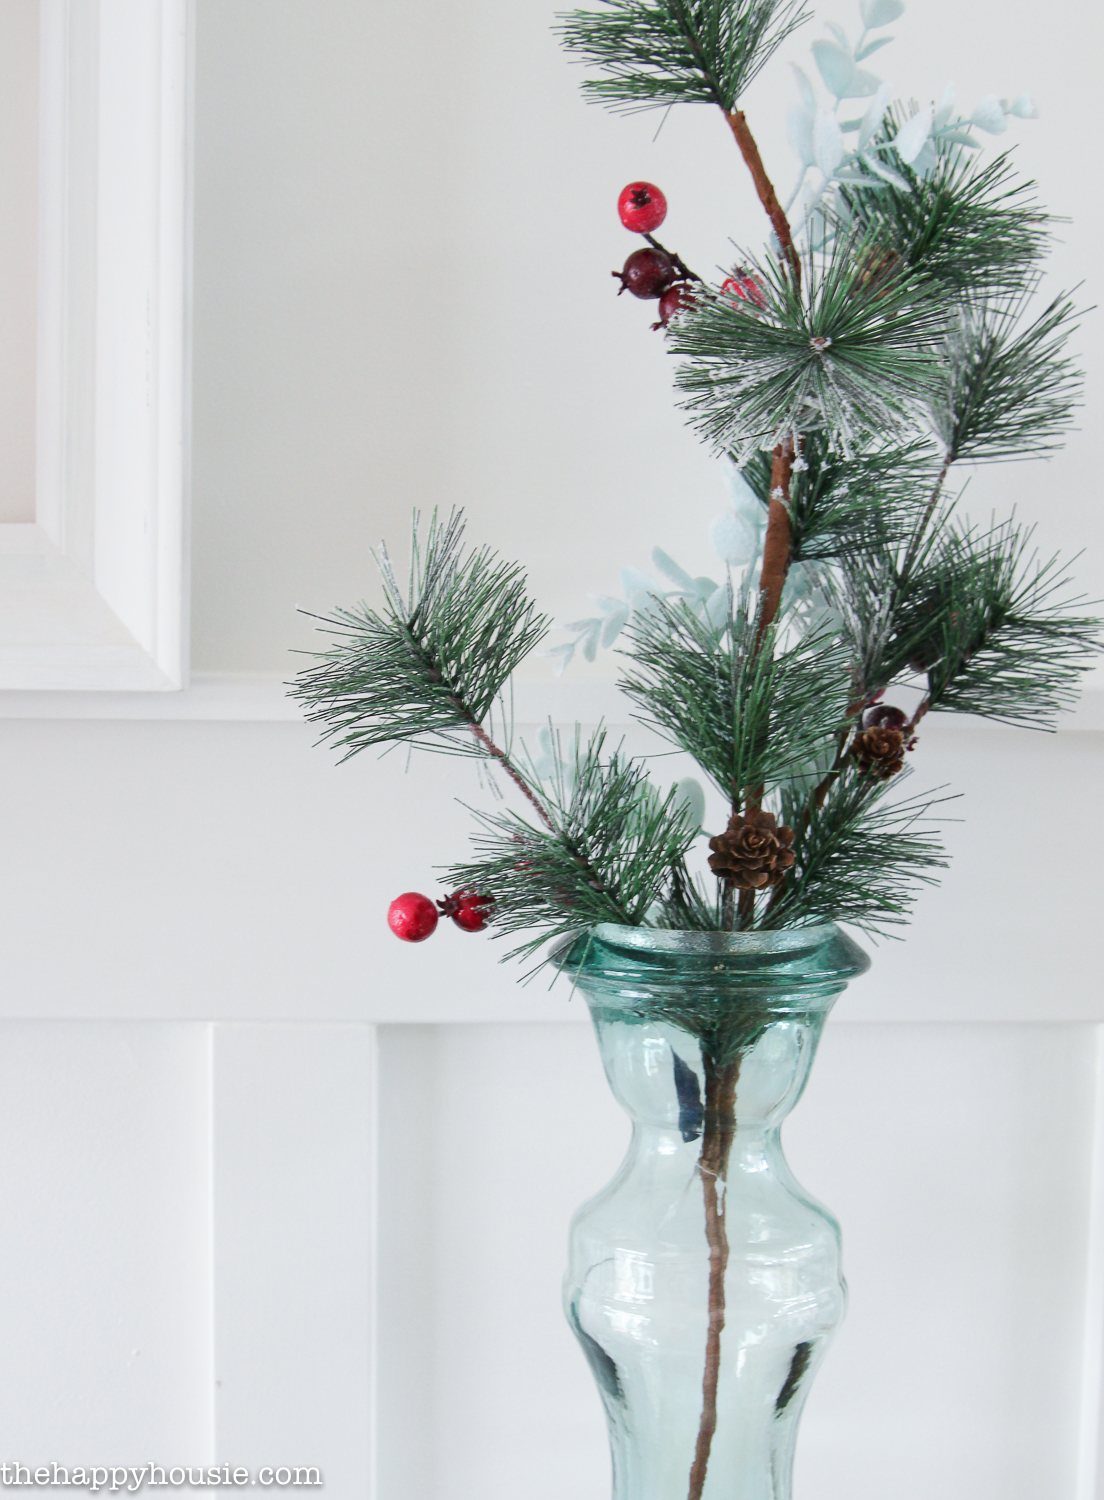 A single branch of evergreen with red berries is in clear glass vase.